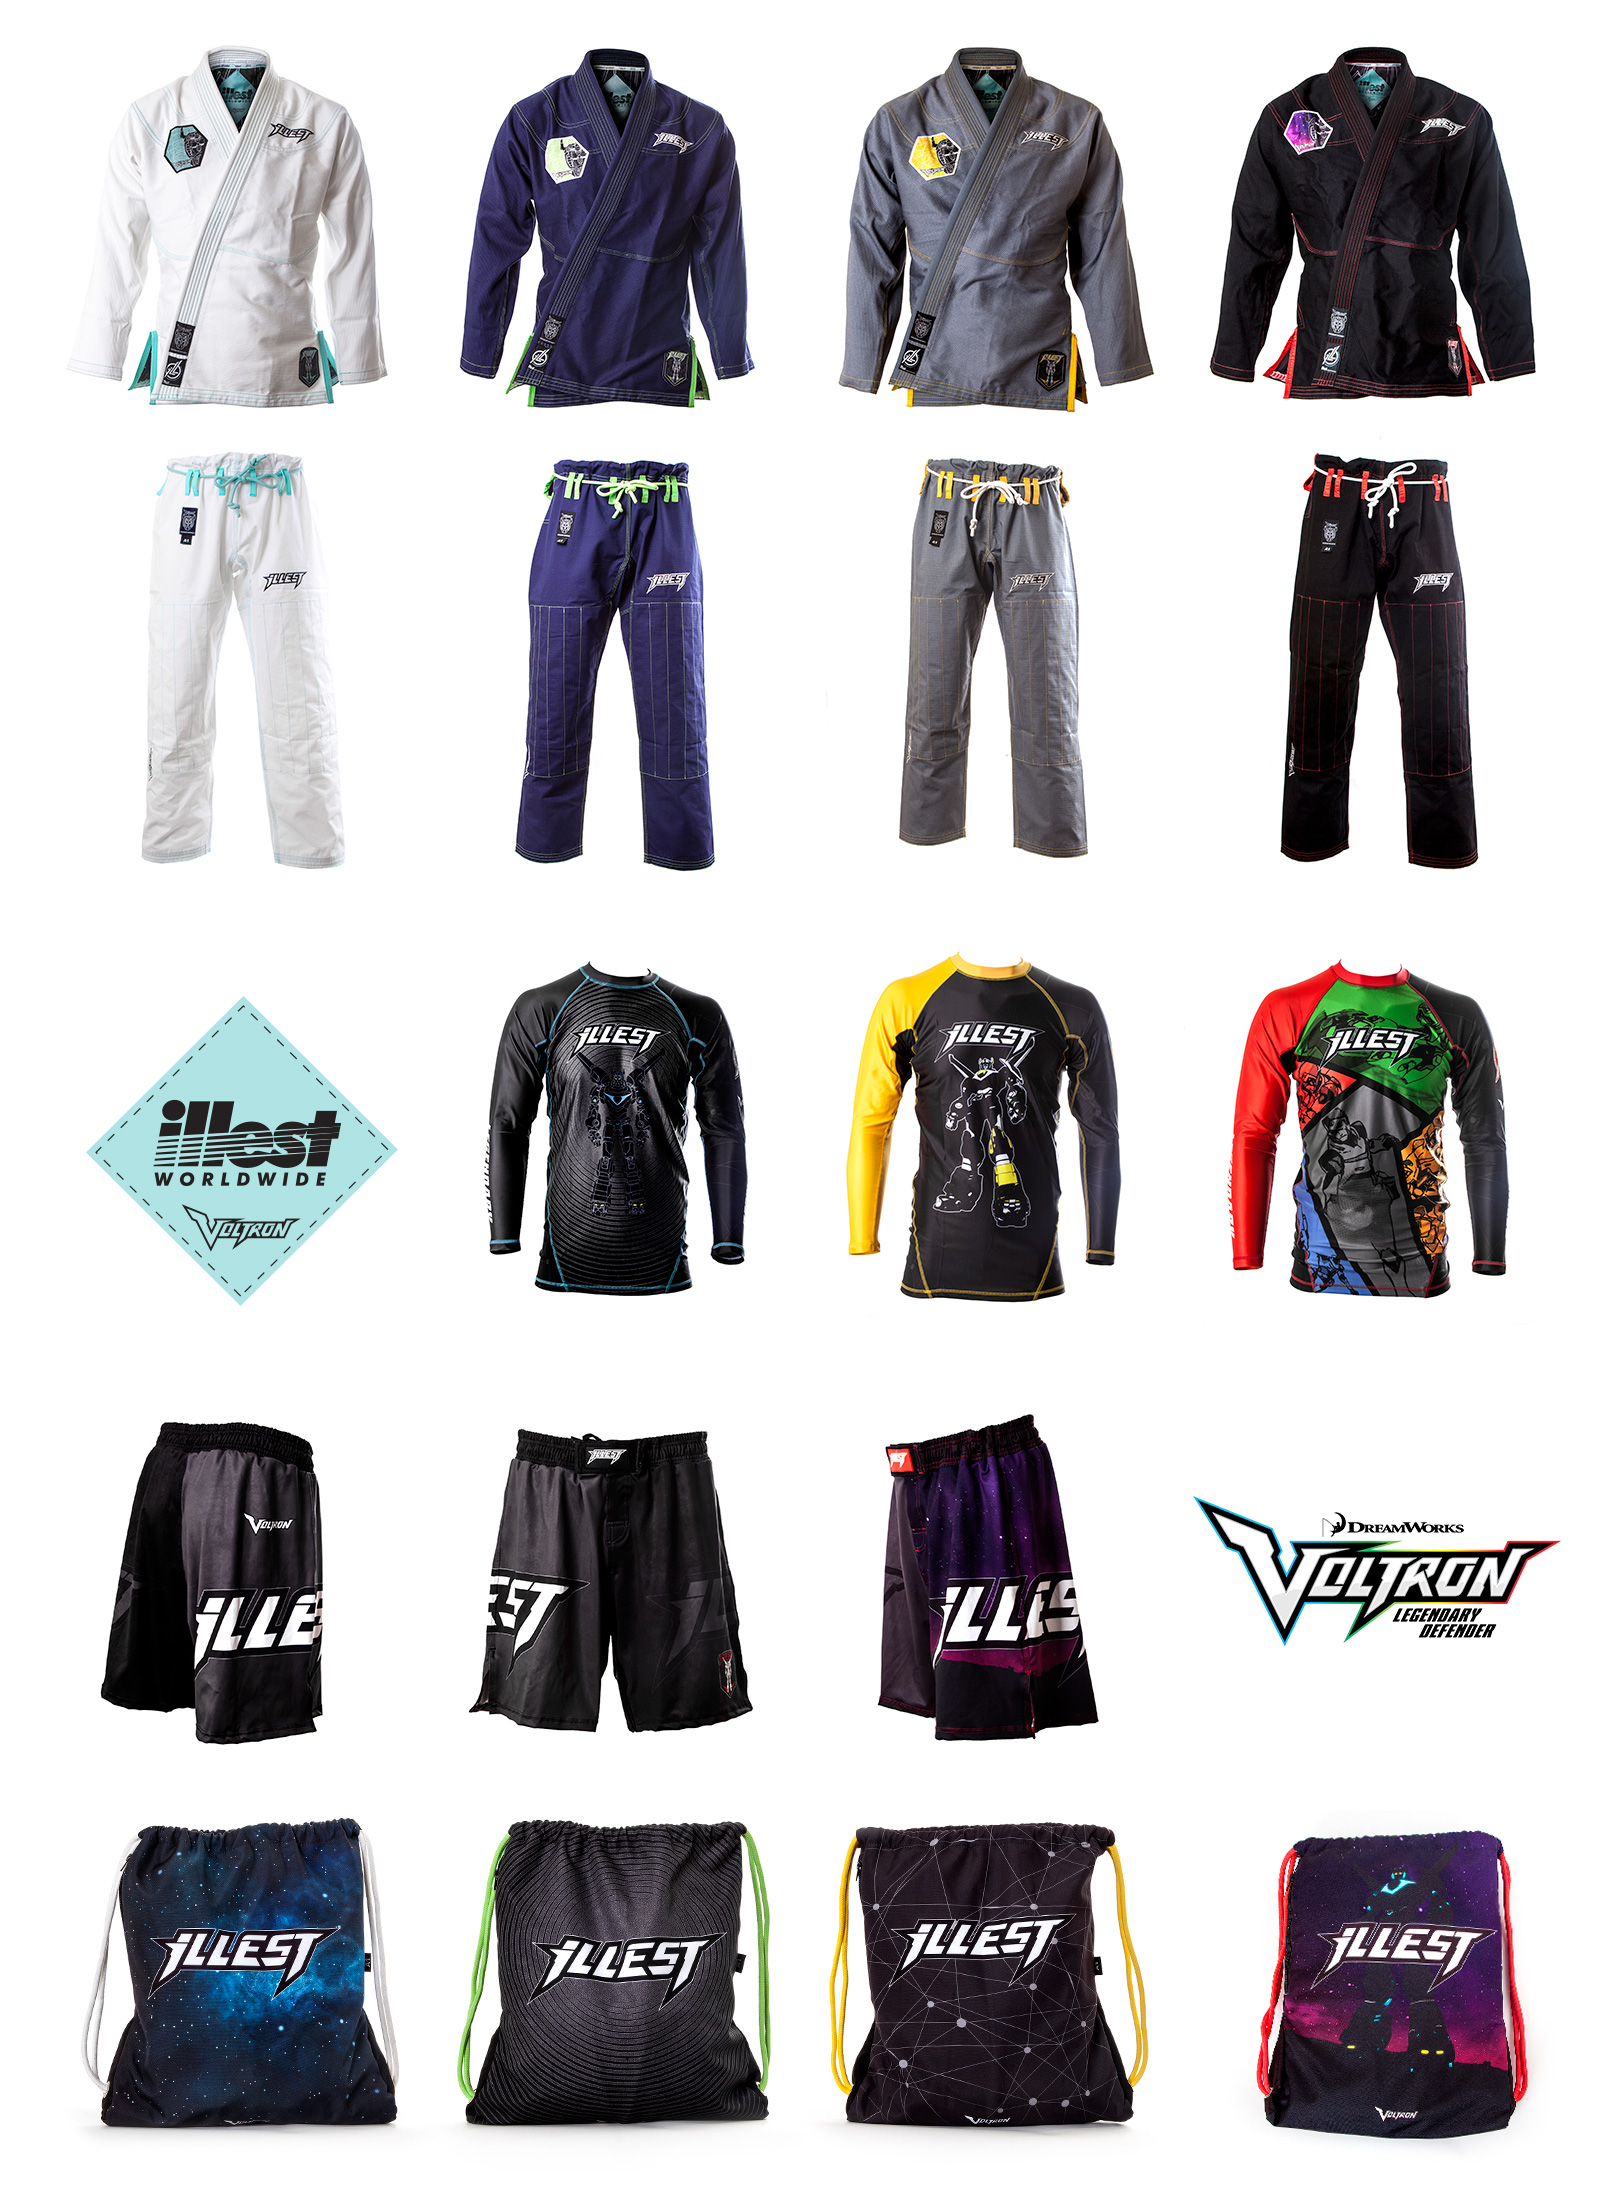 ILLEST Voltron Juijitsu Collection featuring BJJ Gis, rash guards, and sparring shorts